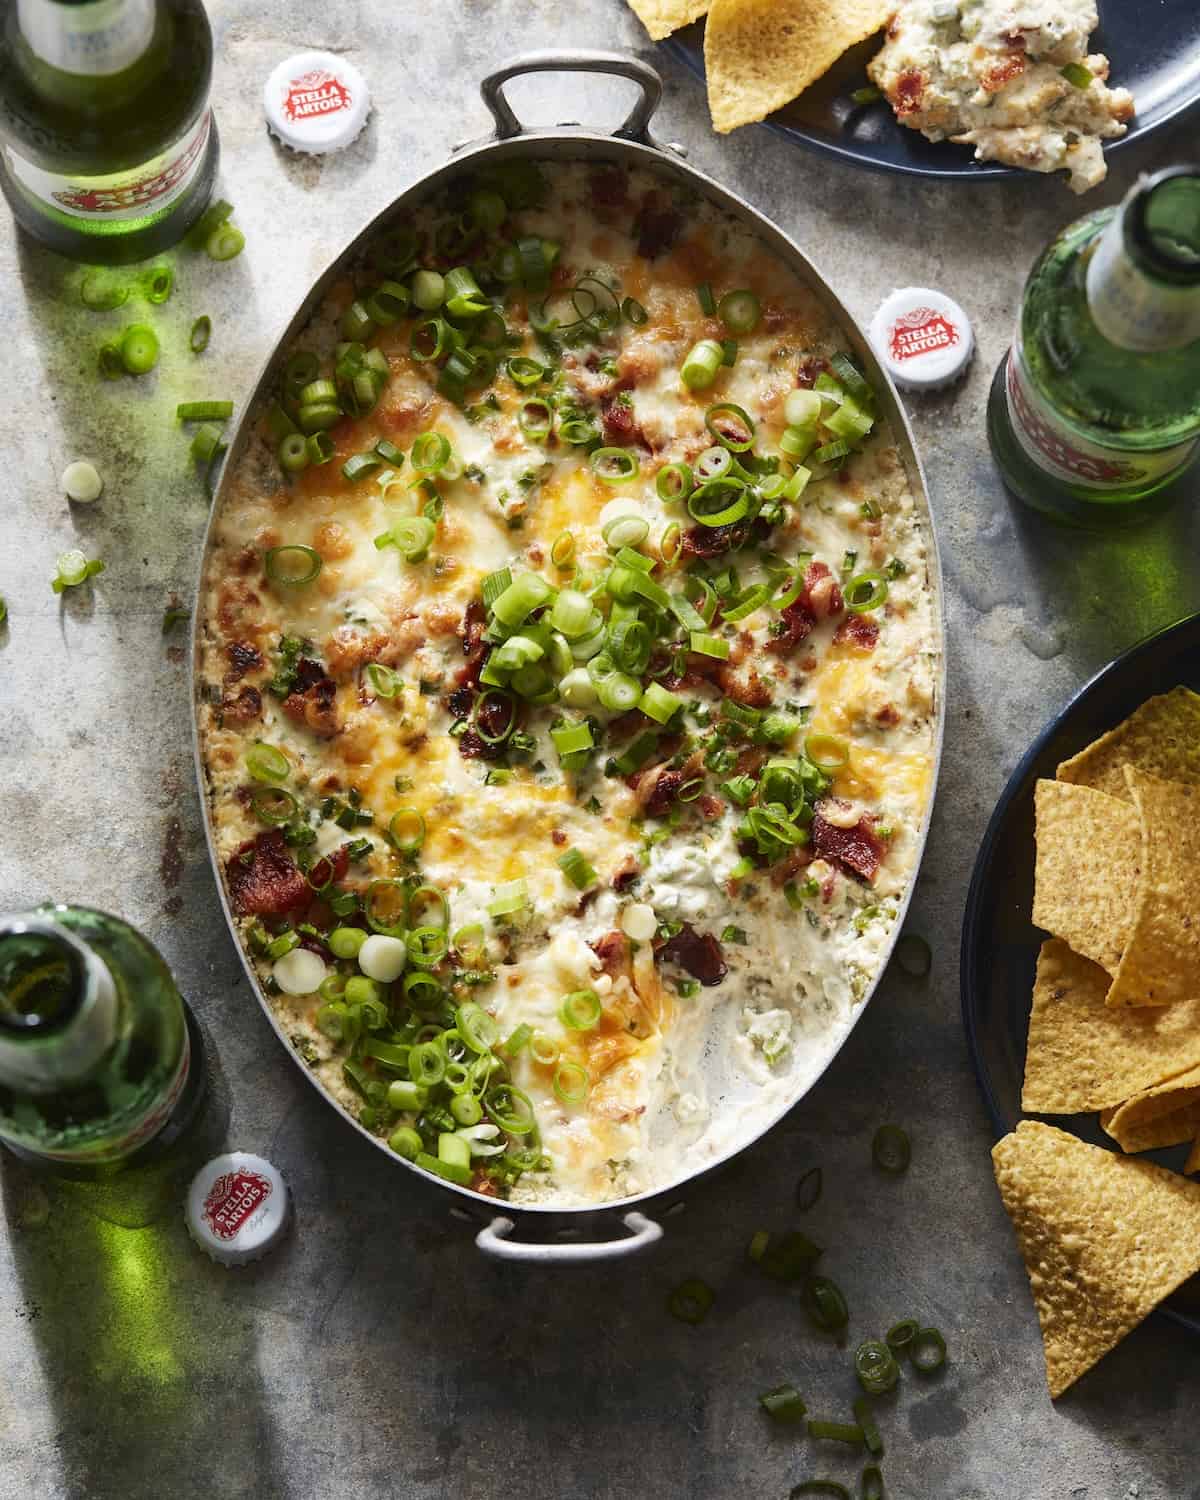 An overheat shot of jalapeño popper dip in a rectangular dish, with Stella Artois beer bottles and plates with tortilla chips on the side.